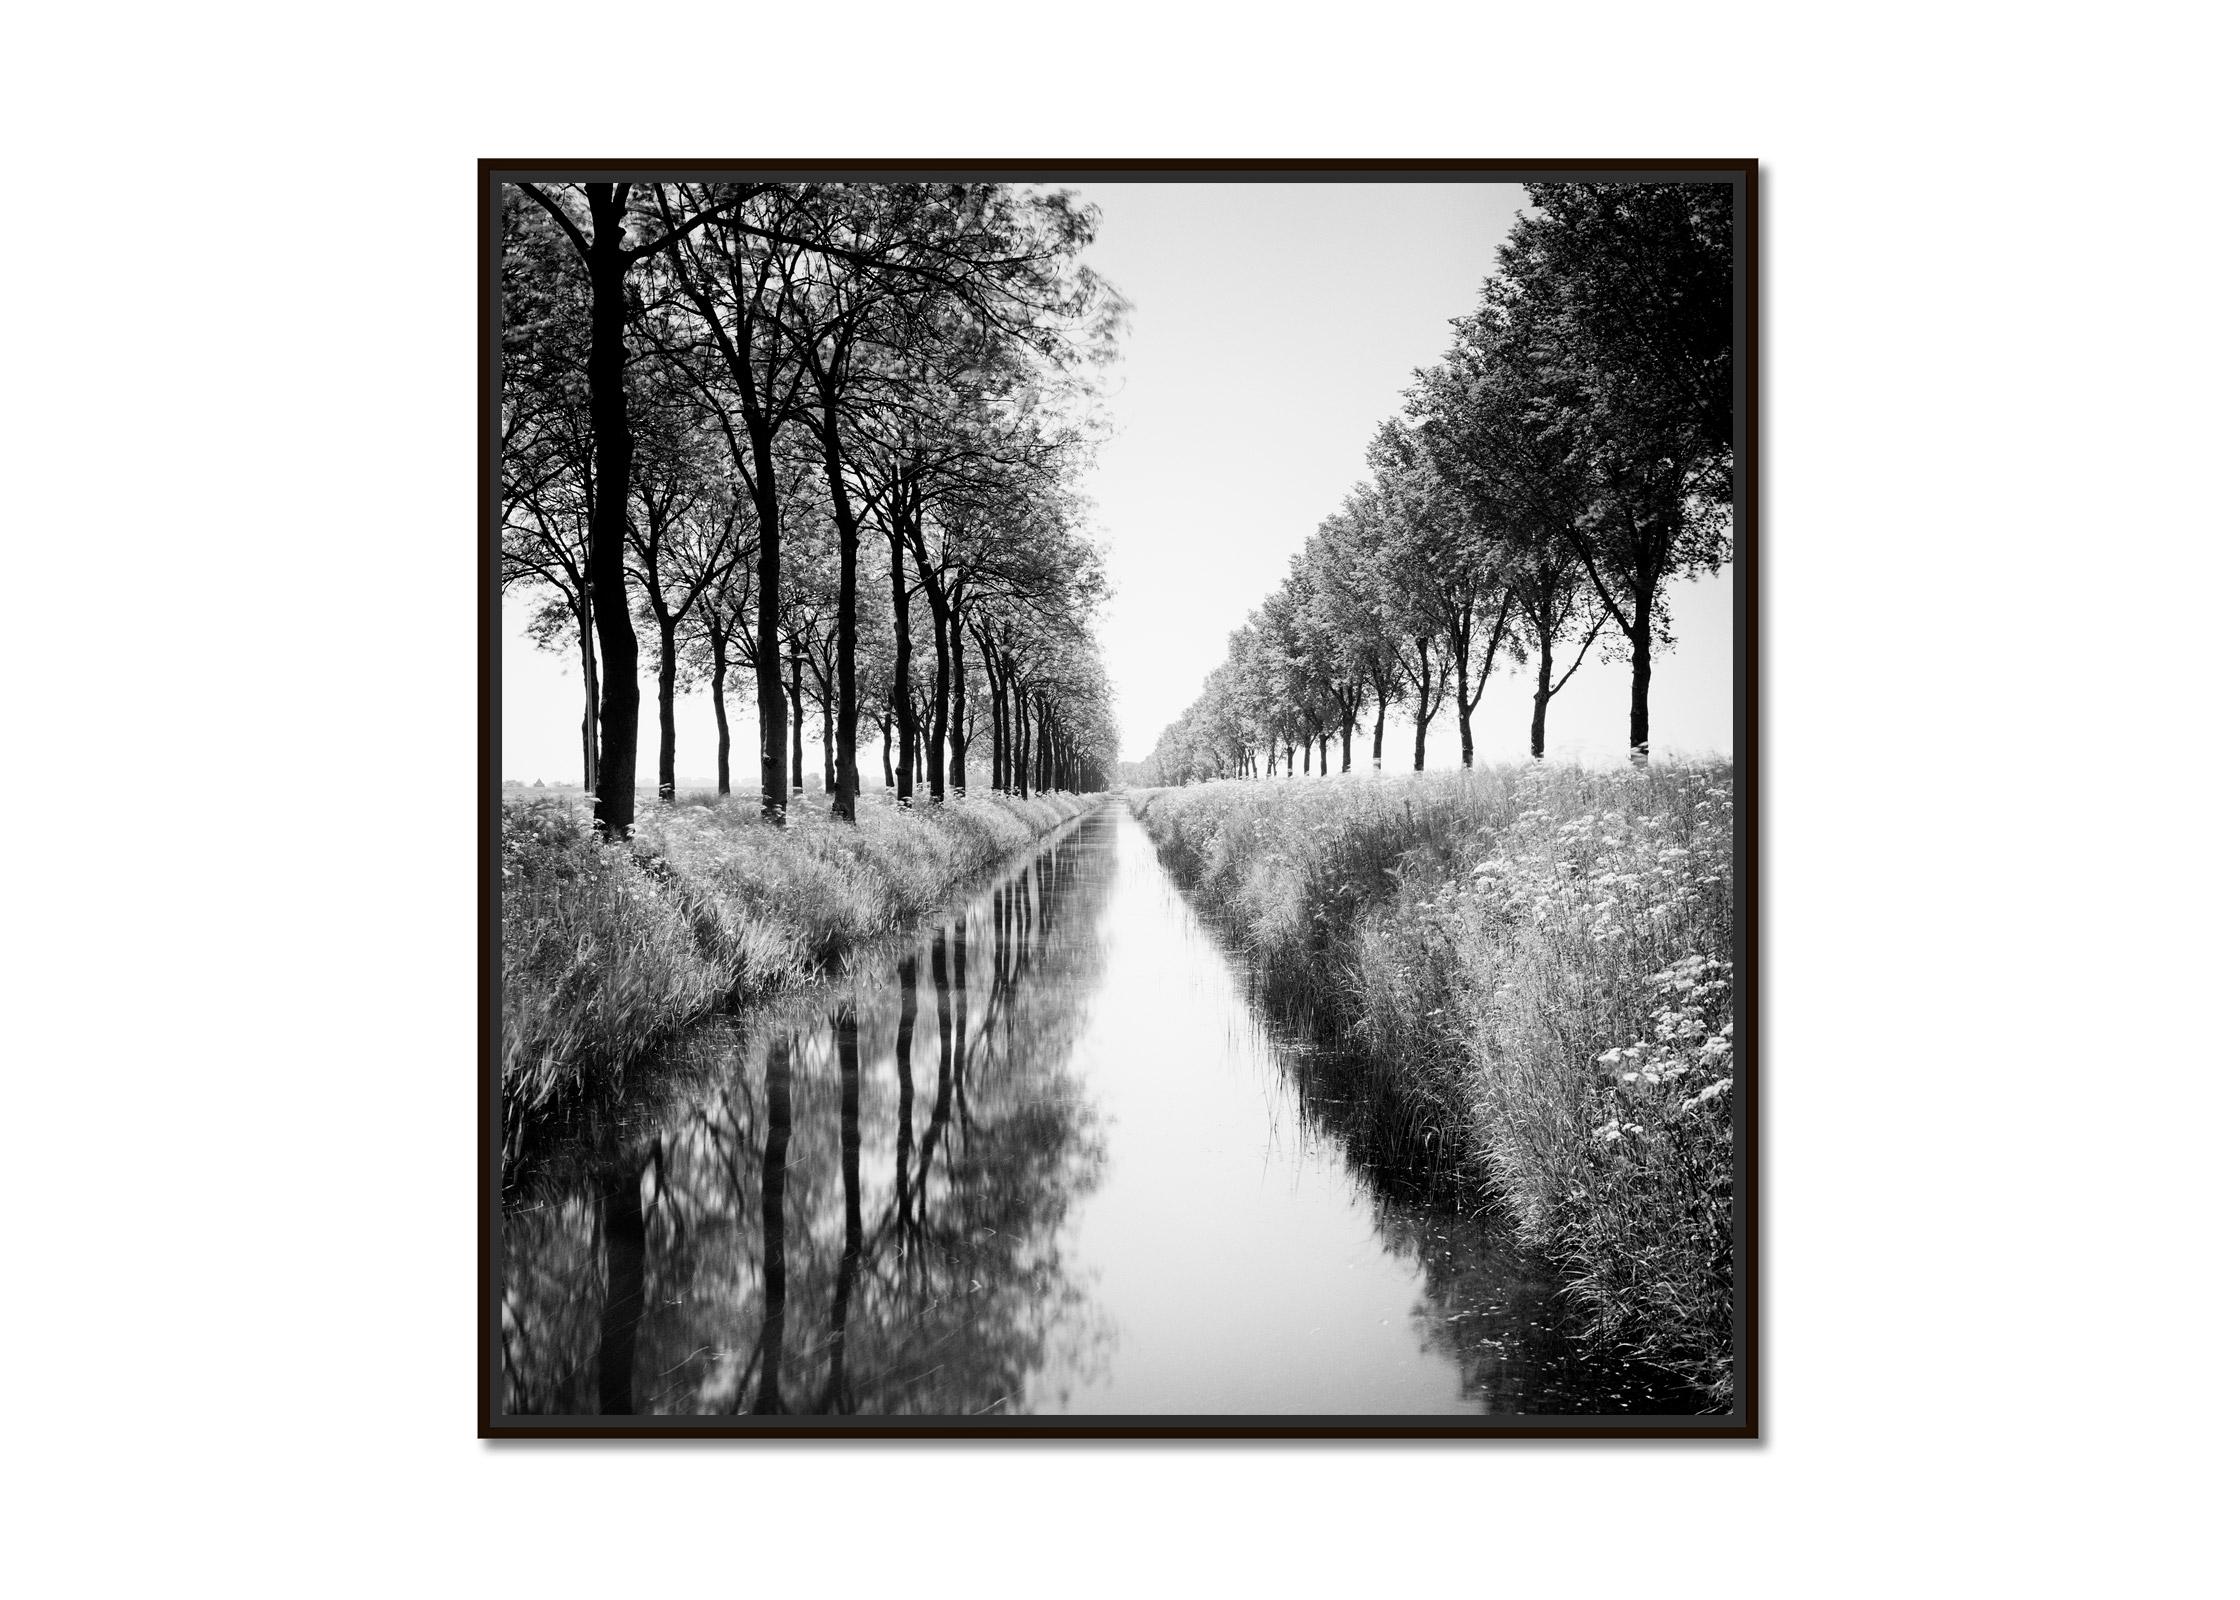 Gracht, tree avenue, water reflection, black and white long exposure photography - Photograph by Gerald Berghammer